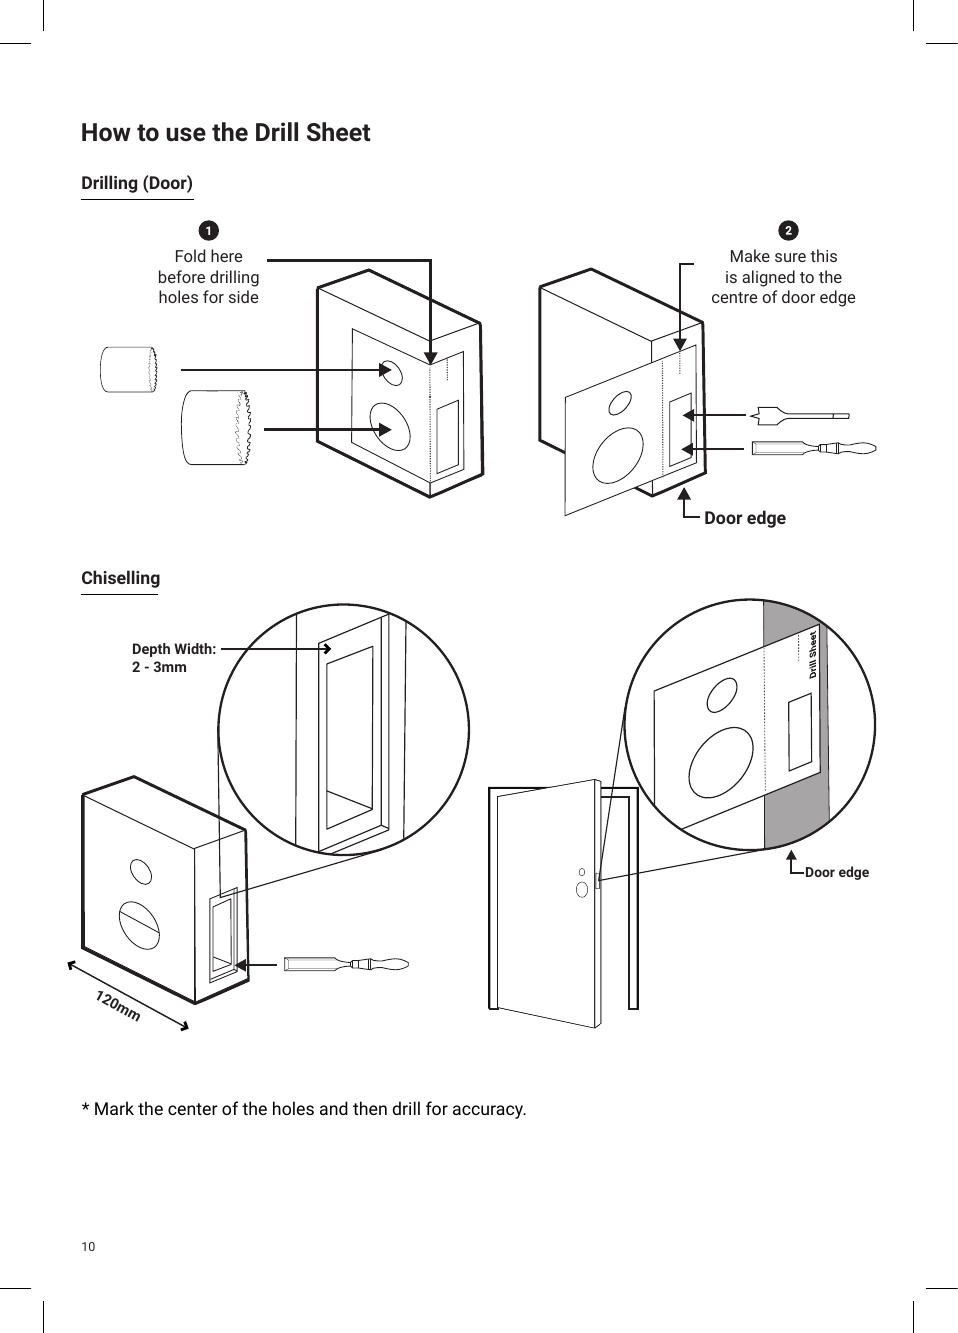 How to use the Drill Sheet* Mark the center of the holes and then drill for accuracy.Drilling (Door)Make sure this is aligned to the centre of door edgeDoor edgeFold herebefore drilling holes for side Door edge10120mmChisellingDepth Width:2 - 3mm